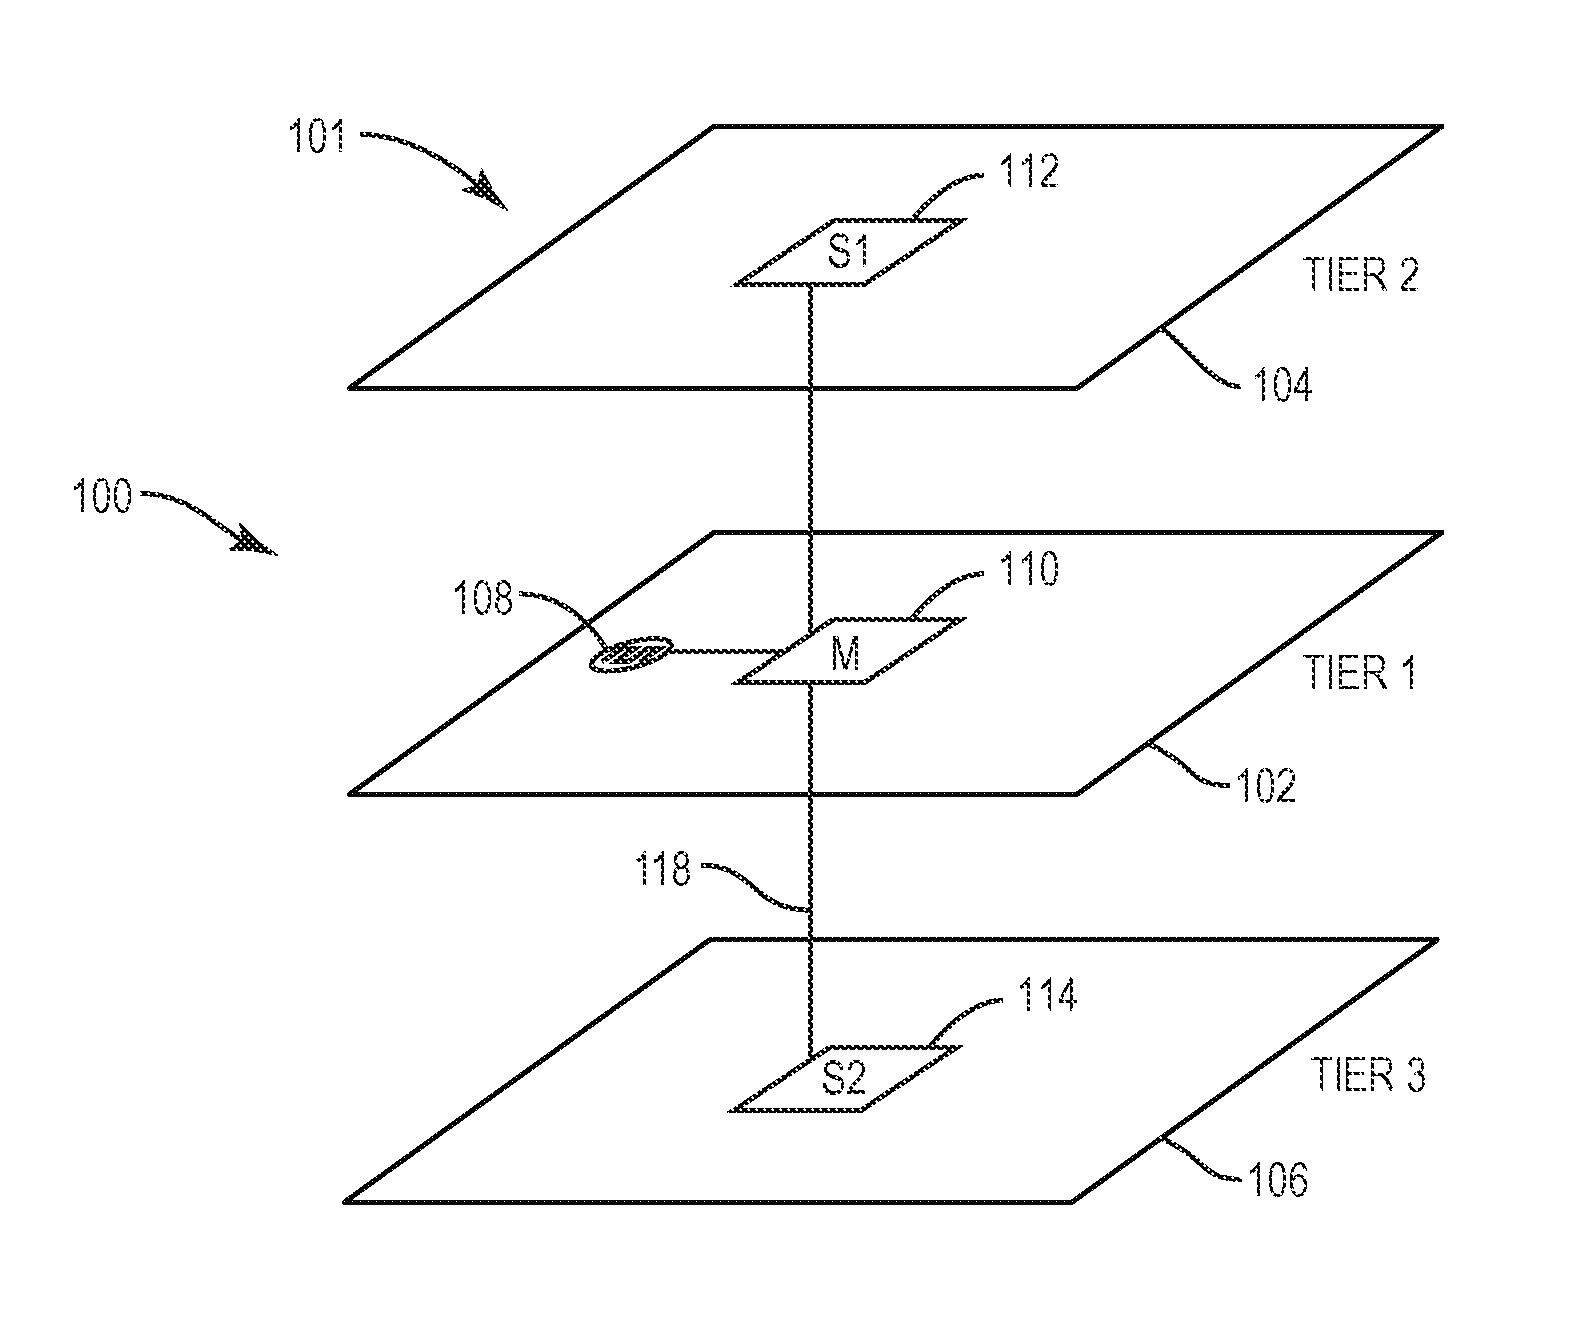 Flip-flops in a monolithic three-dimensional (3D) integrated circuit (IC) (3DIC) and related methods